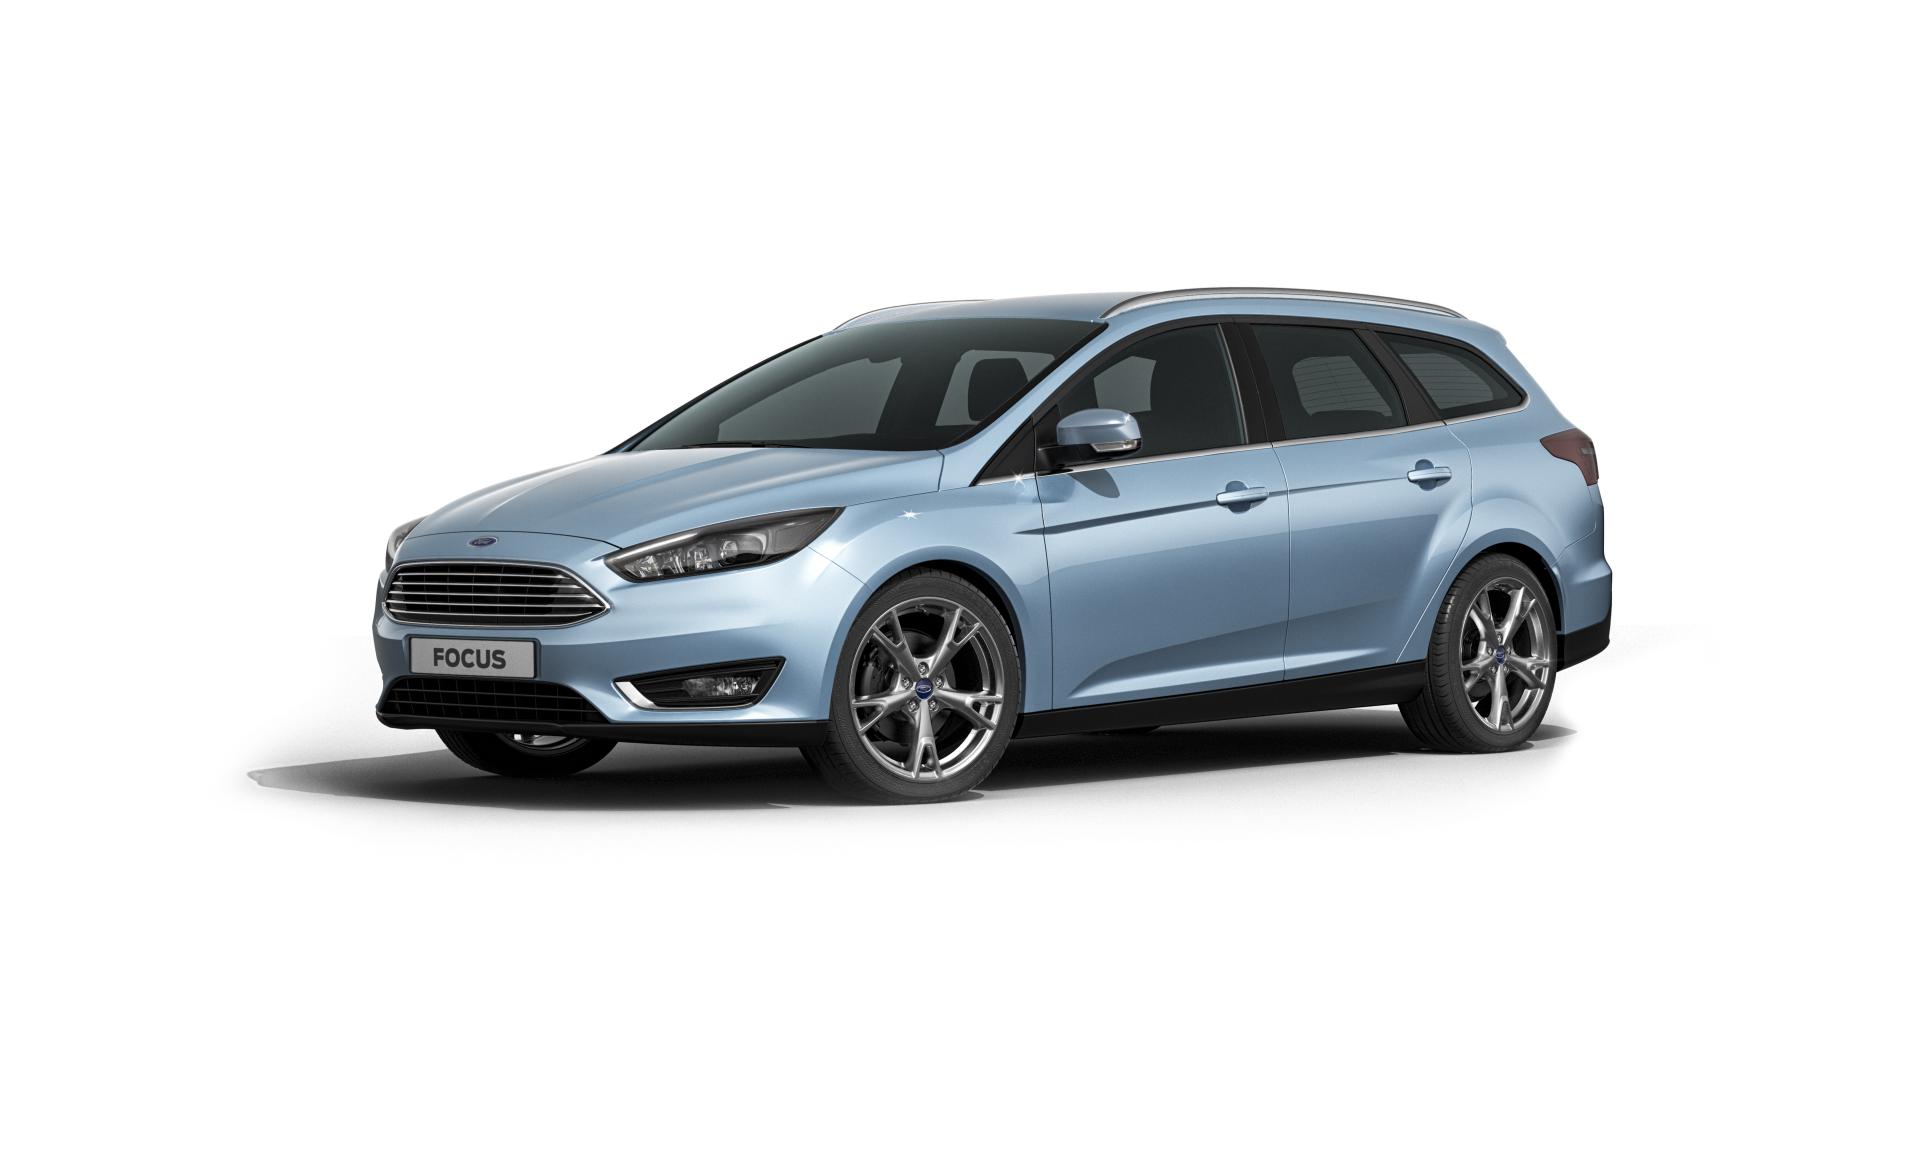 2015 Ford Focus Wagon Backgrounds on Wallpapers Vista